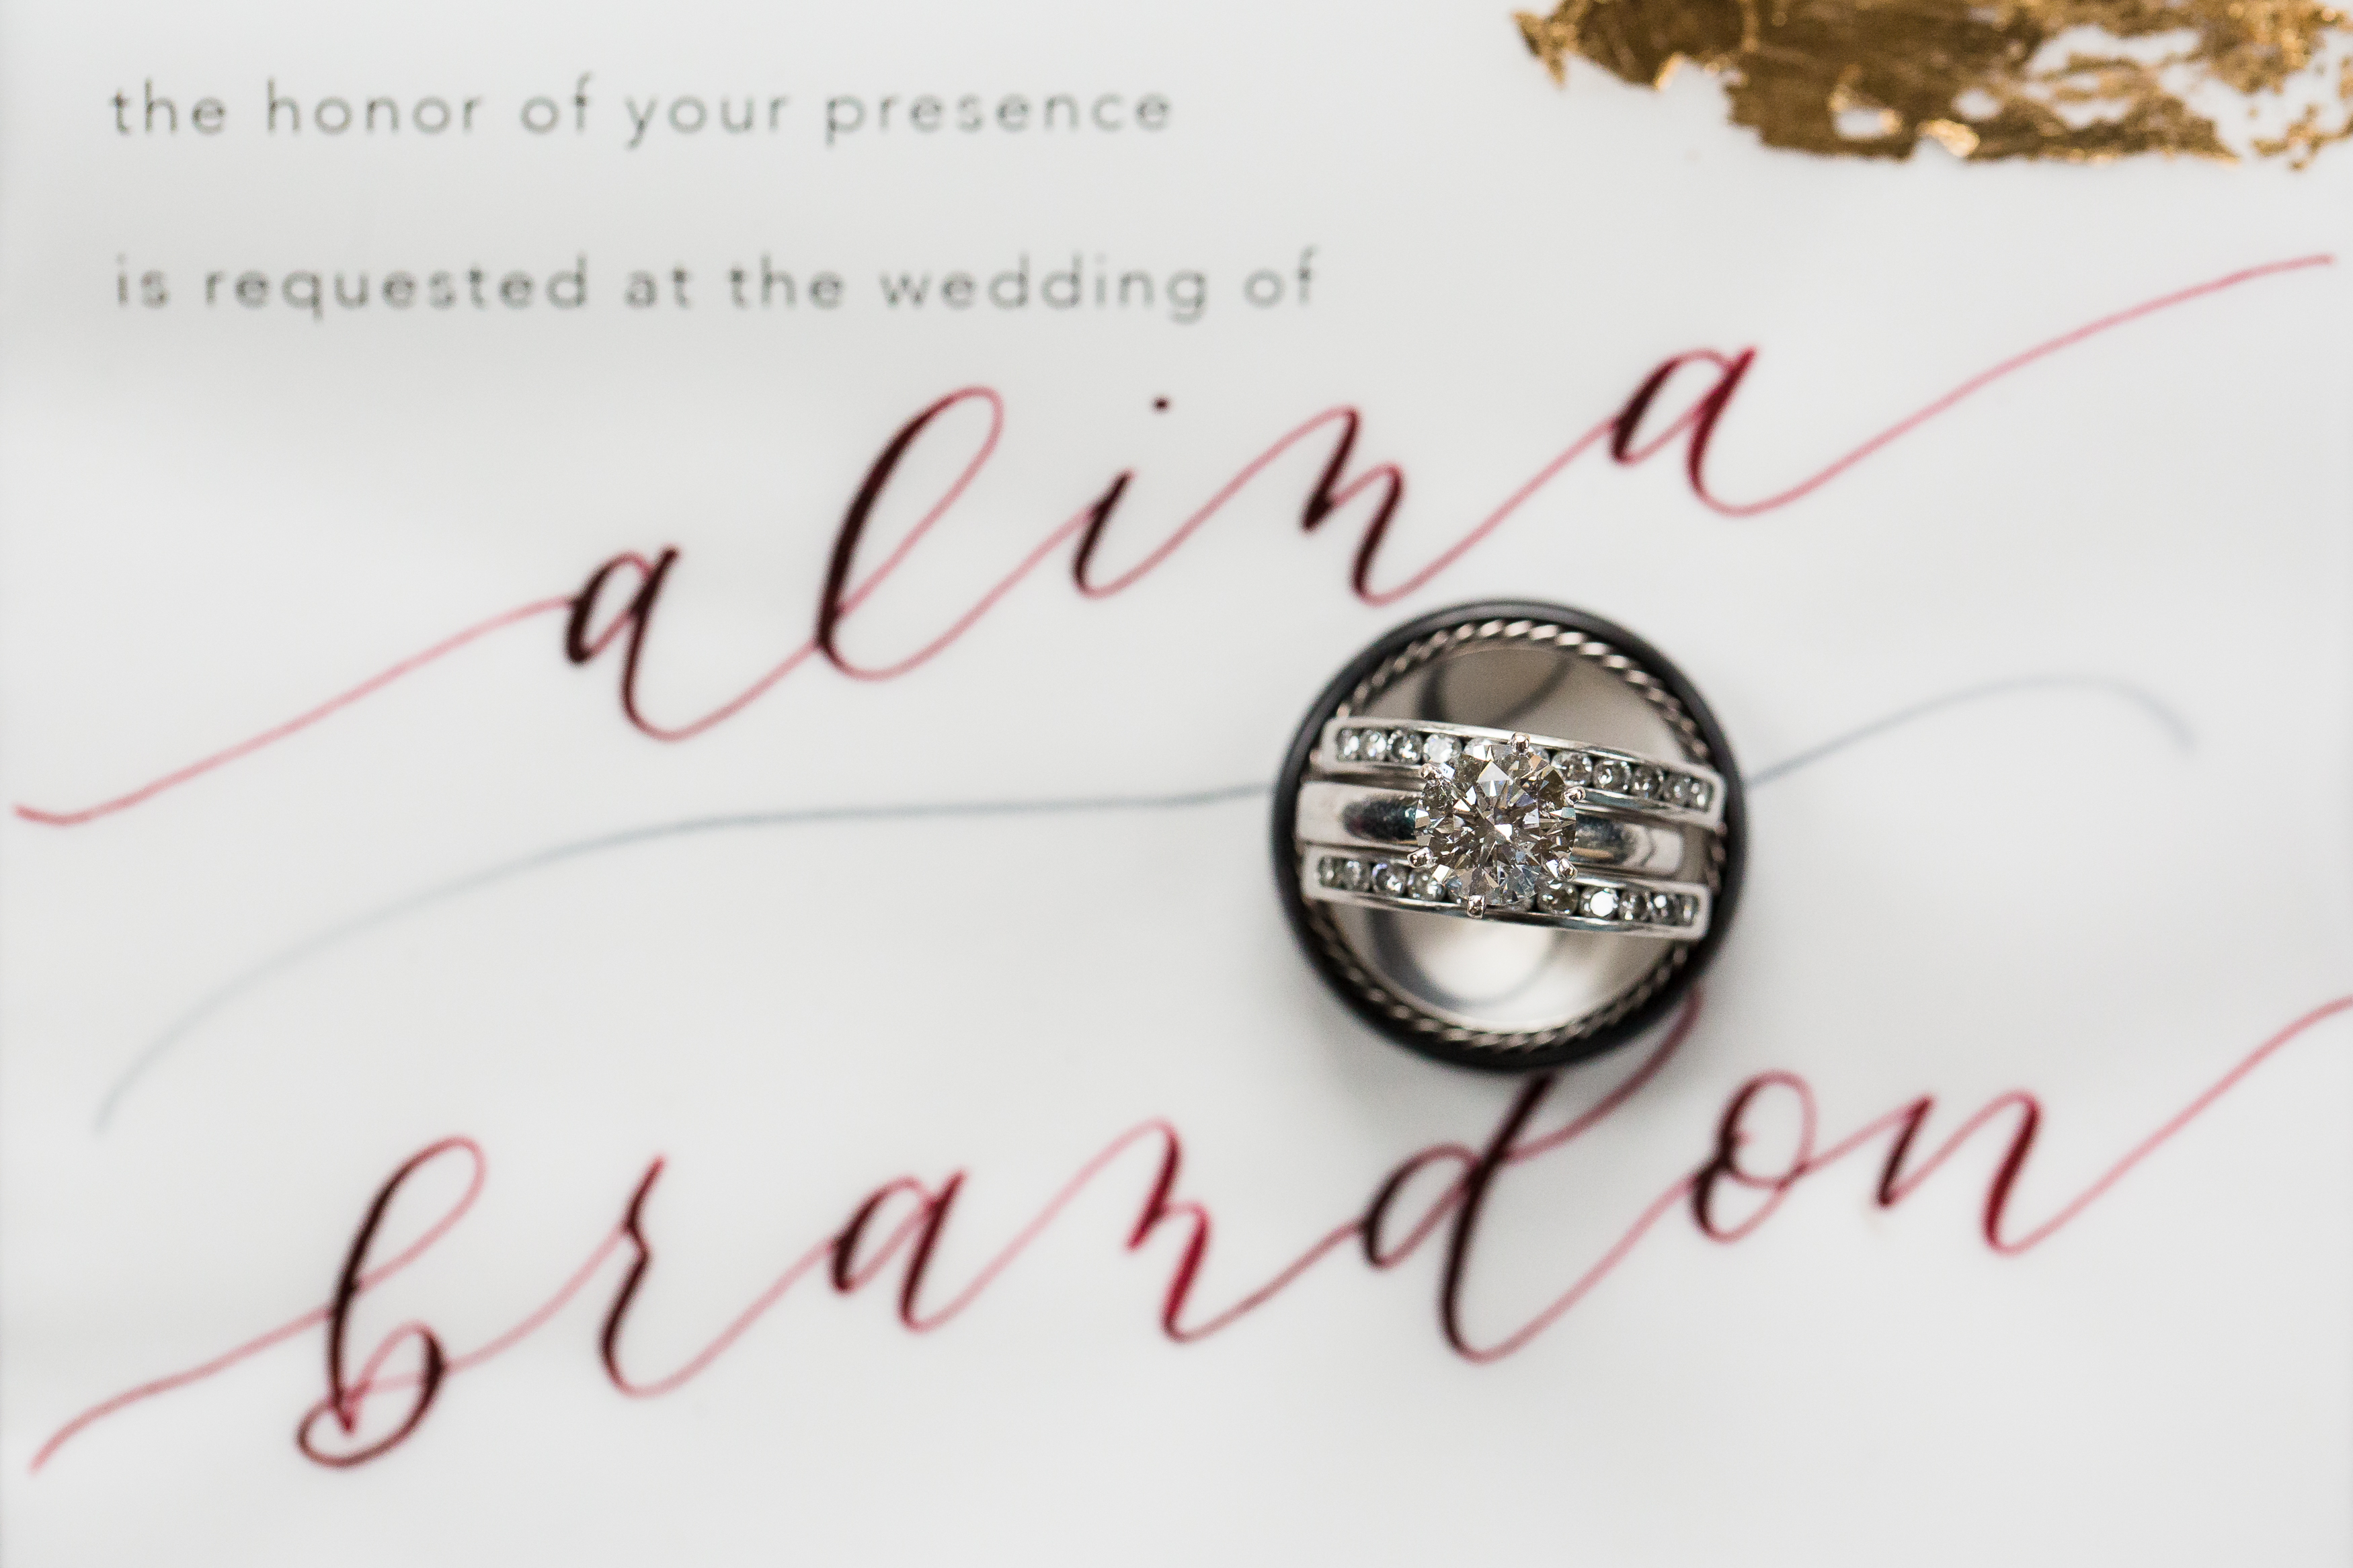 Bride and groom's wedding ring suite on wedding invitation stationery